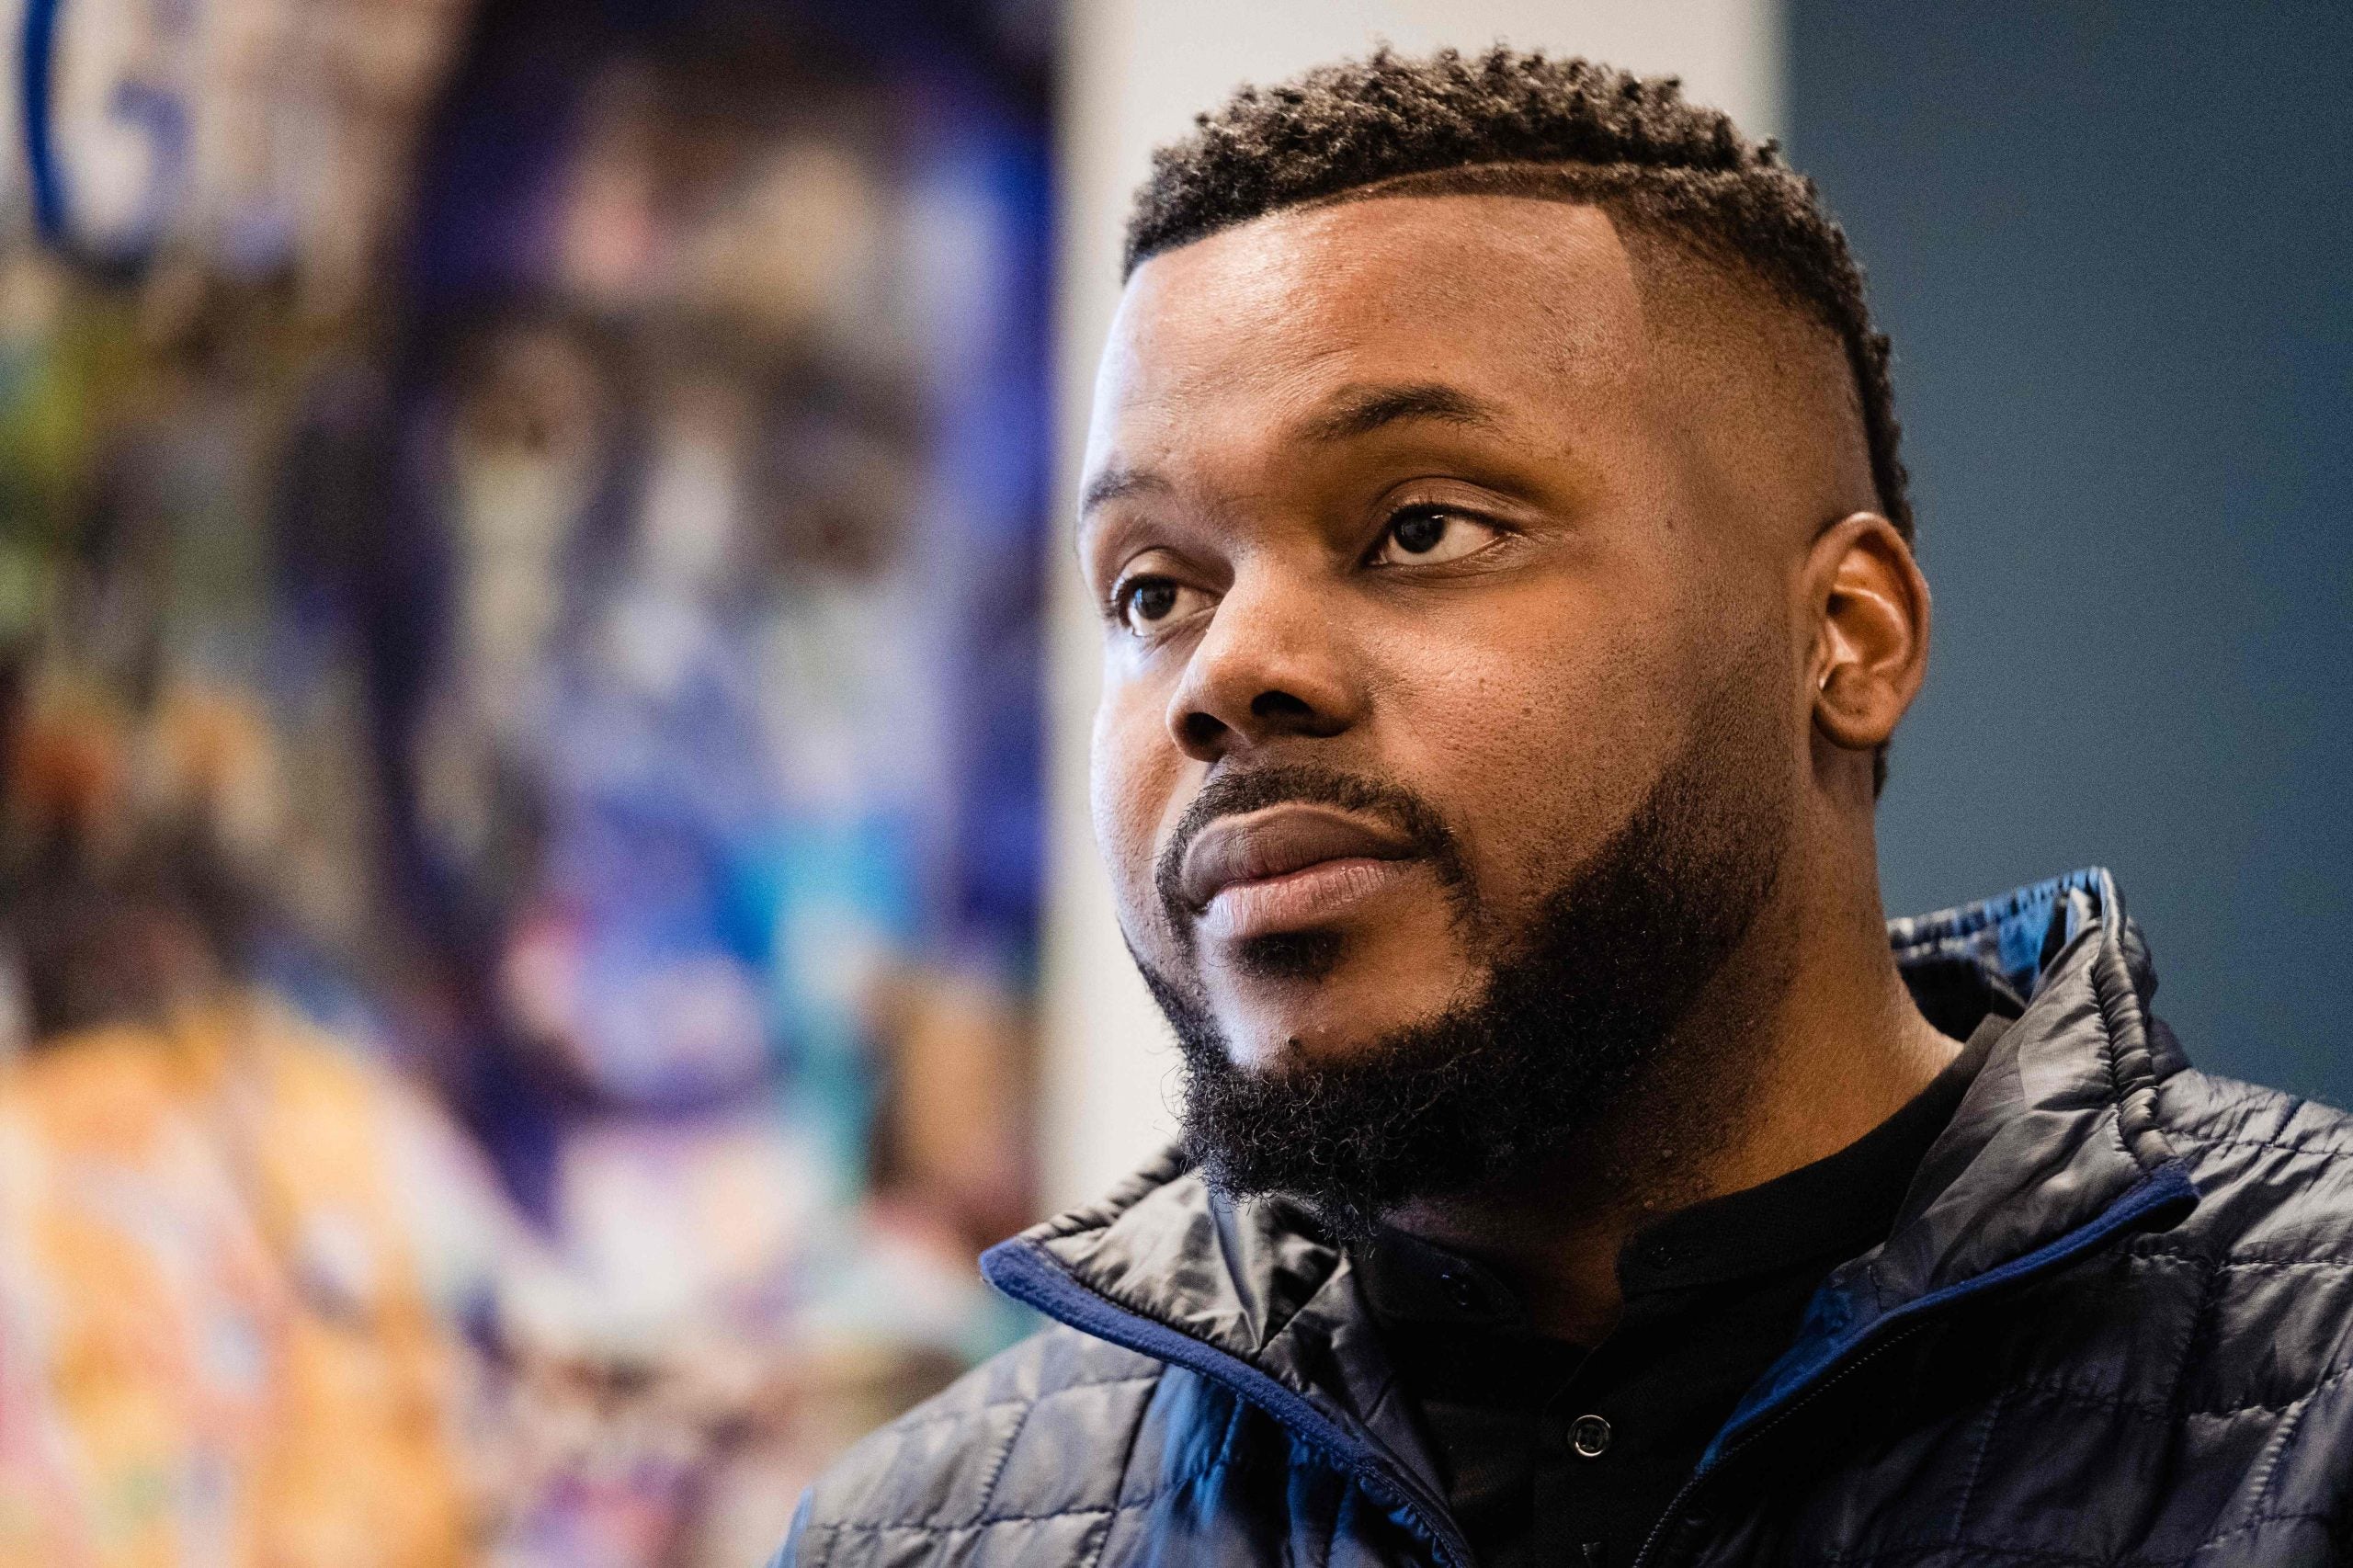 Michael Tubbs Made History As The Youngest And First Black Mayor of Stockton, California. He's Telling His Story.